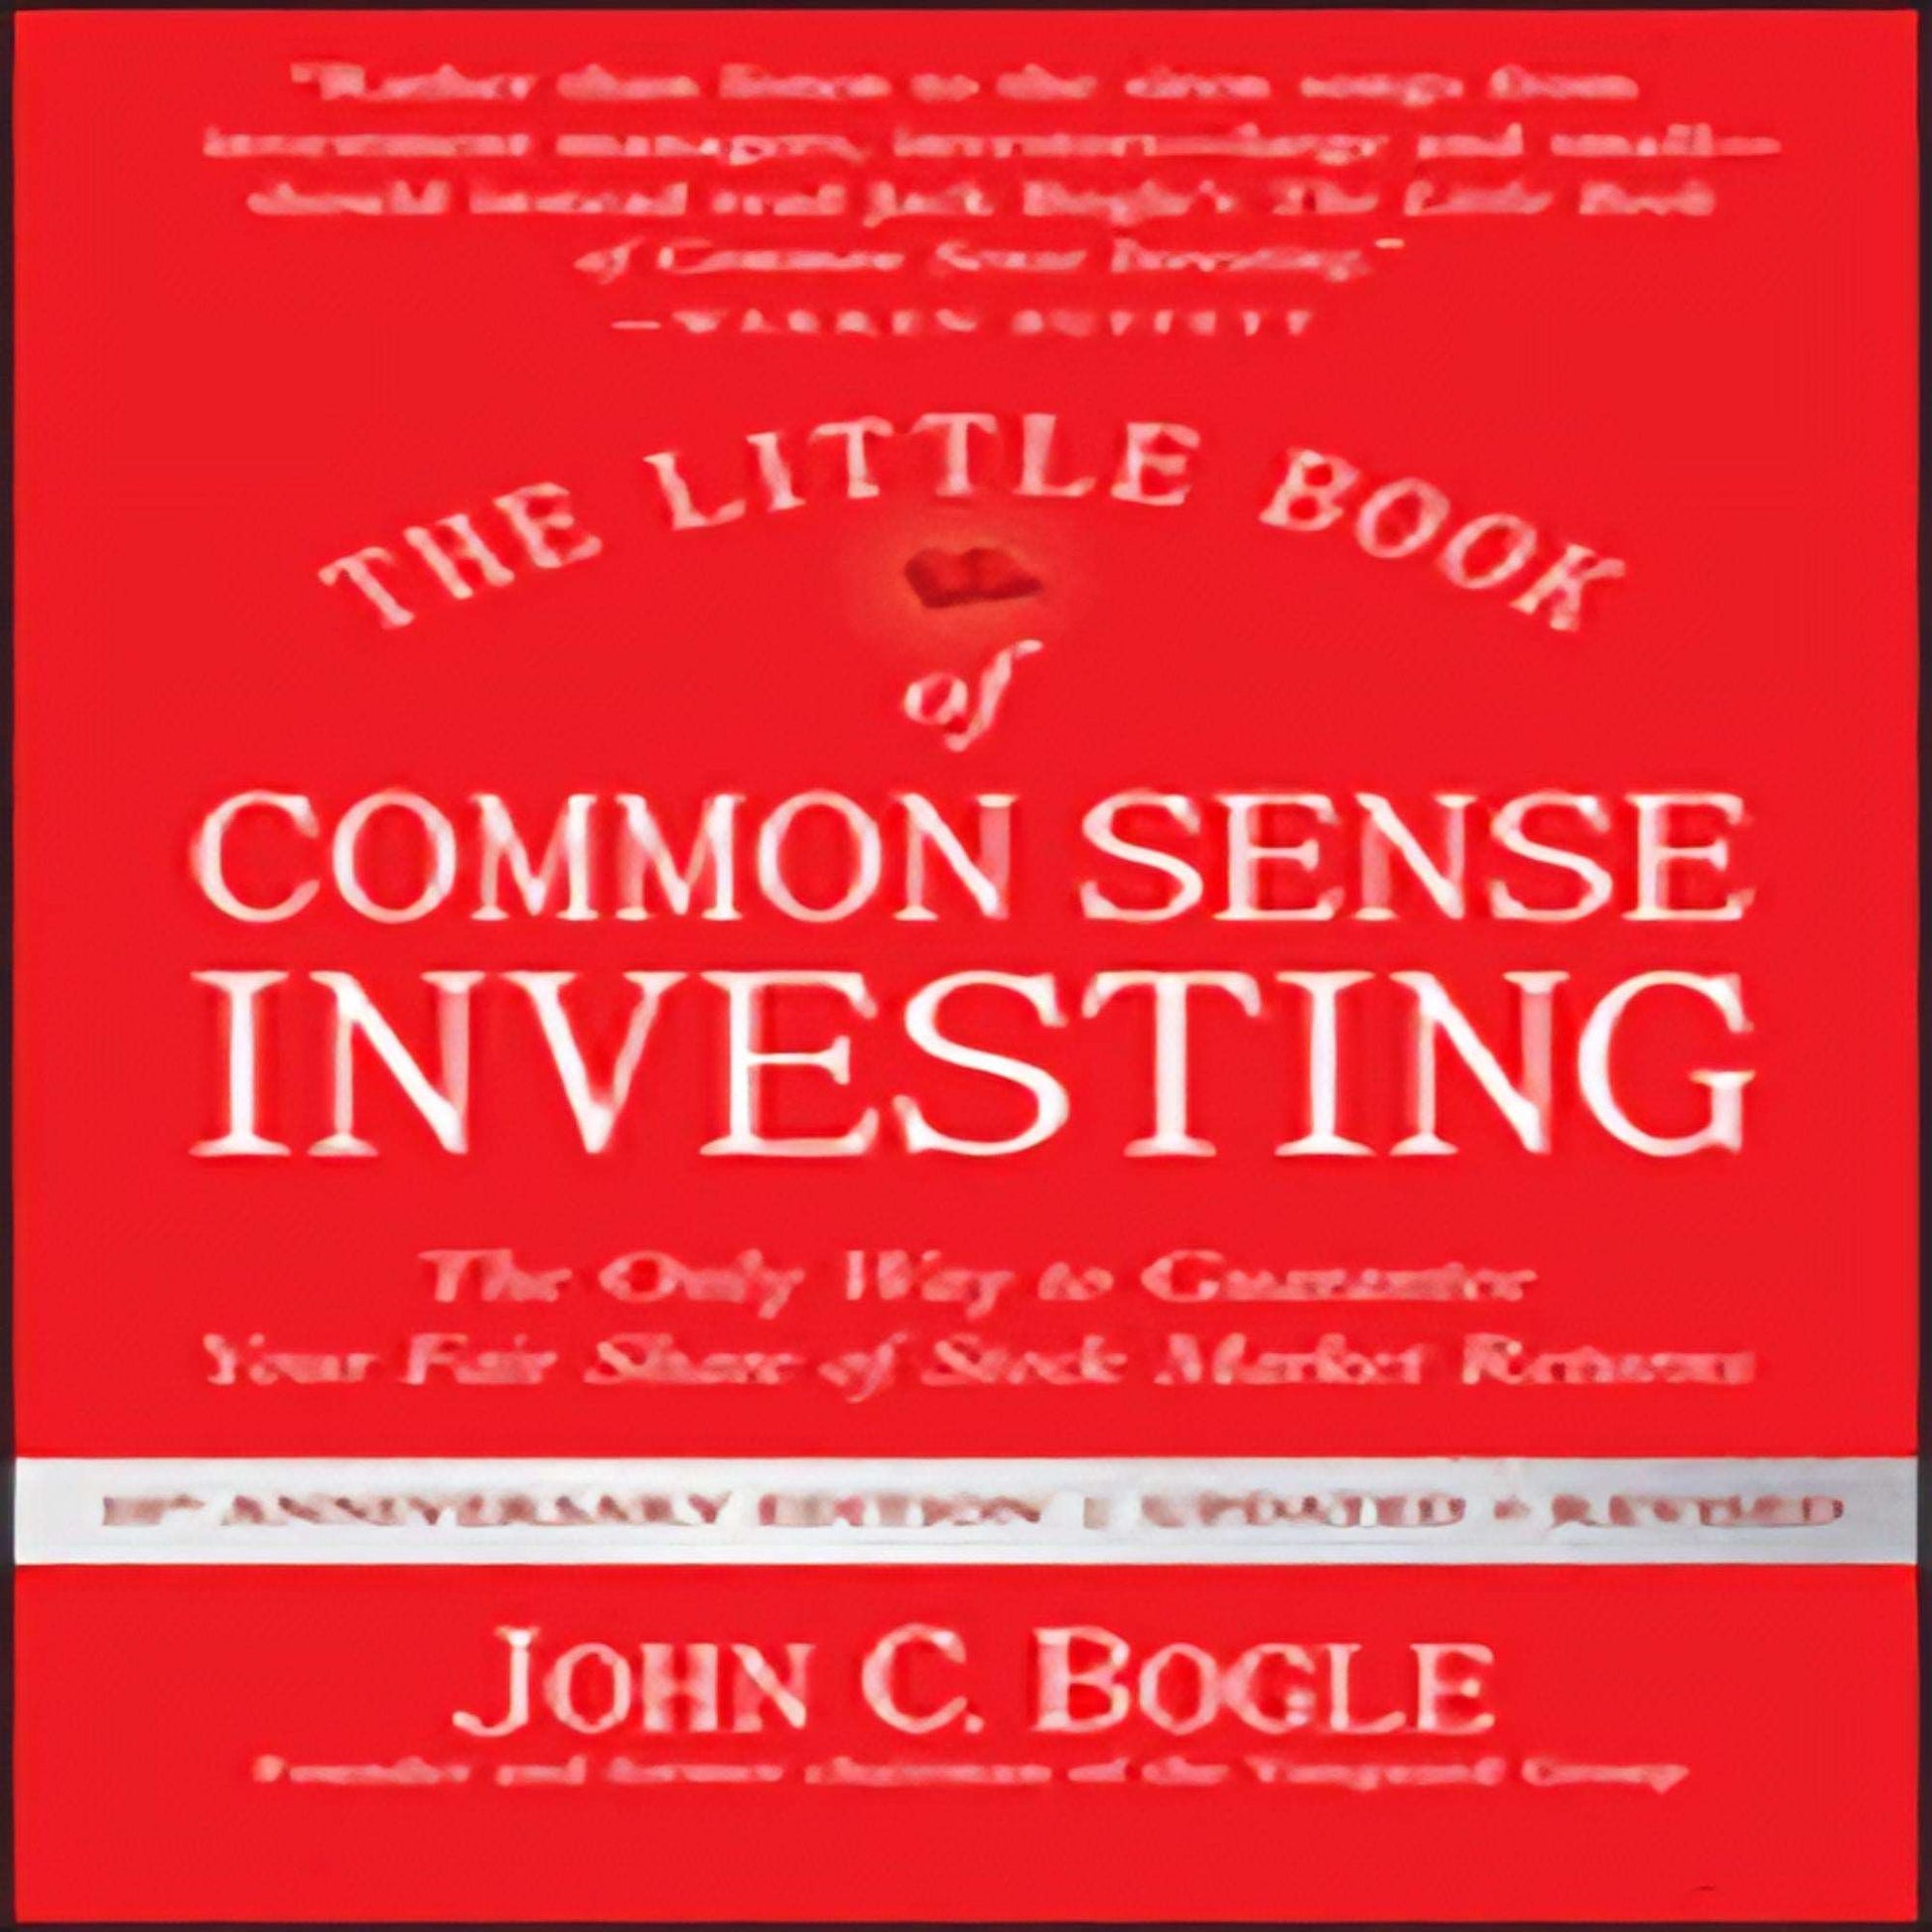 TEXTBOOK The Little Book of Common Sense Investing: The Only Way to Guarantee Your Fair Share of Stock Market Returns (Anniversary, Revised, Updated) (Little Books. Big Profits) (10TH ed.)139-022223-1119404509DPGBOOKSTORE.COM. Today's Bestsellers.